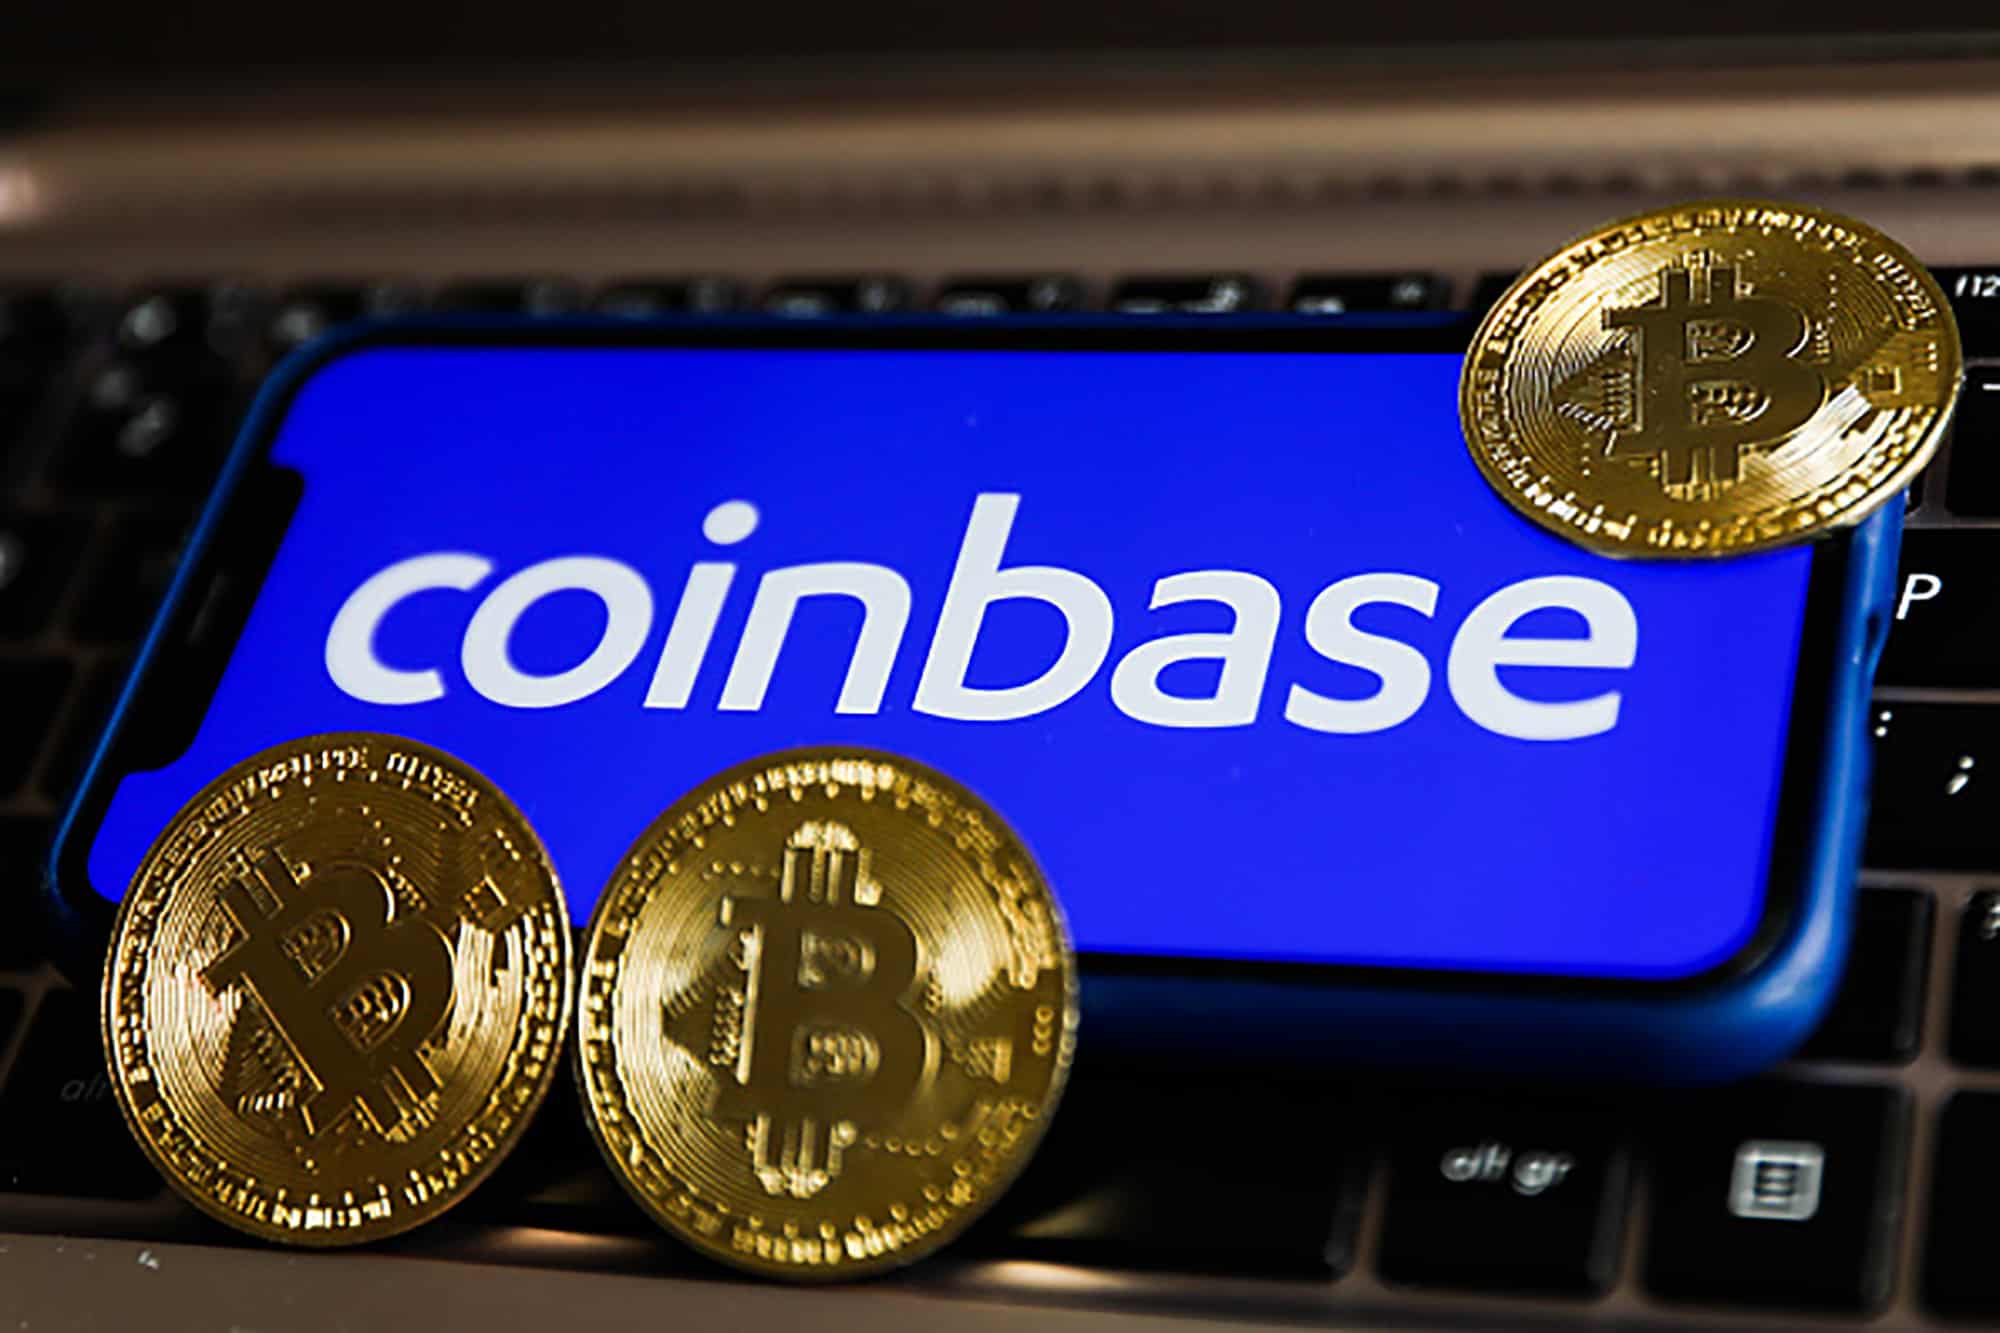 Coinbase "$15 BTC" super bowl advertisement caused the site to crash briefly